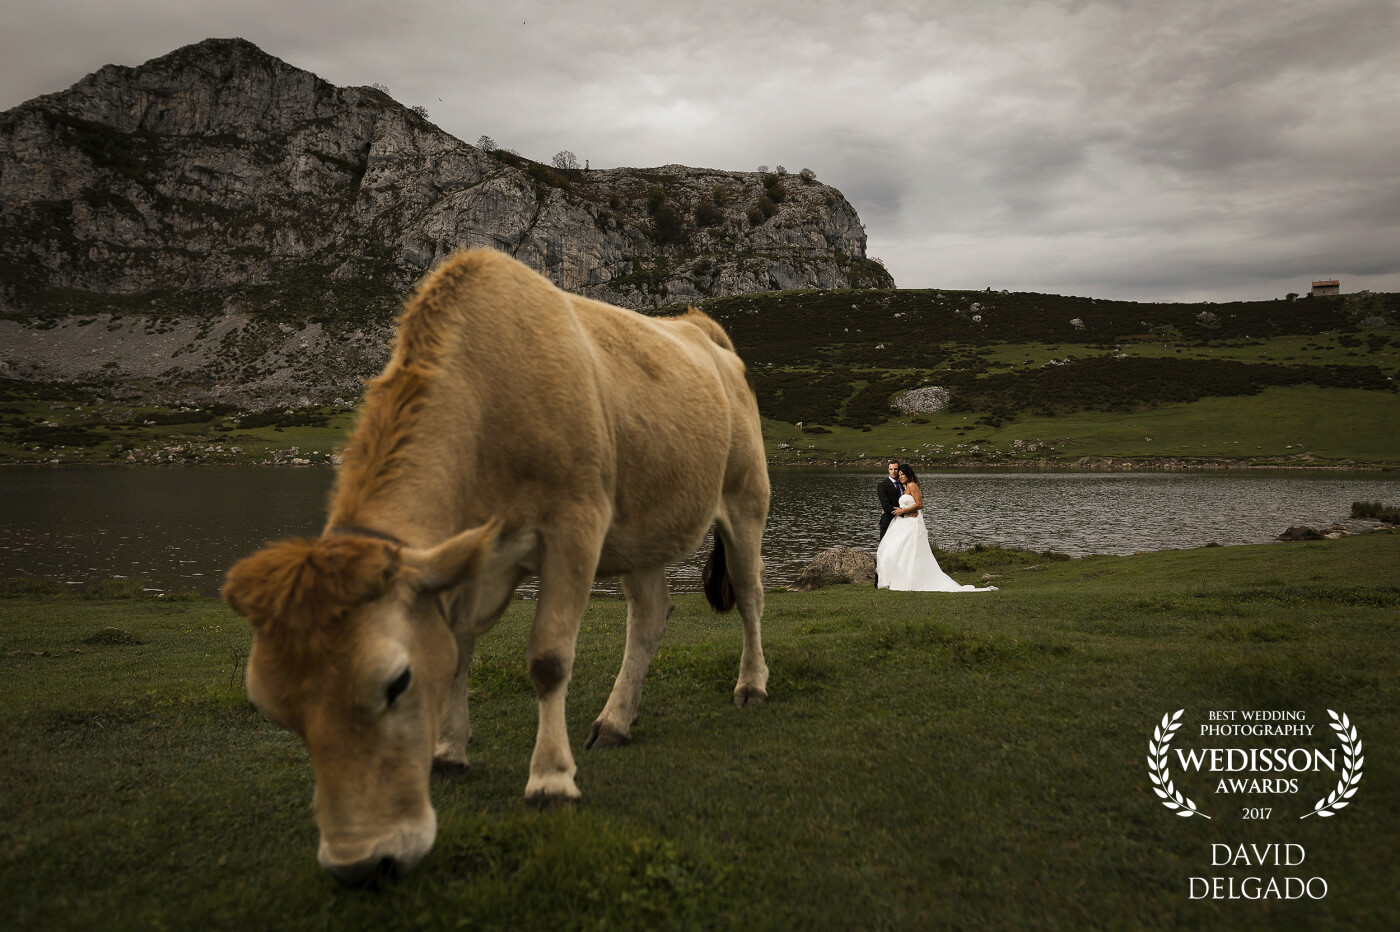 High Mountain Wedding - When Ángel and Silvia proposed to us to make this wedding we loved the idea. The place is Lagos de Covadonga, formed by two small lakes the Enol and the Ercina of glacial origin located in the western massif of the National Park of Picos de Europa in Asturias (Spain). A beautiful place on planet Earth where pure oxygen is breathed and where cows live in their home.